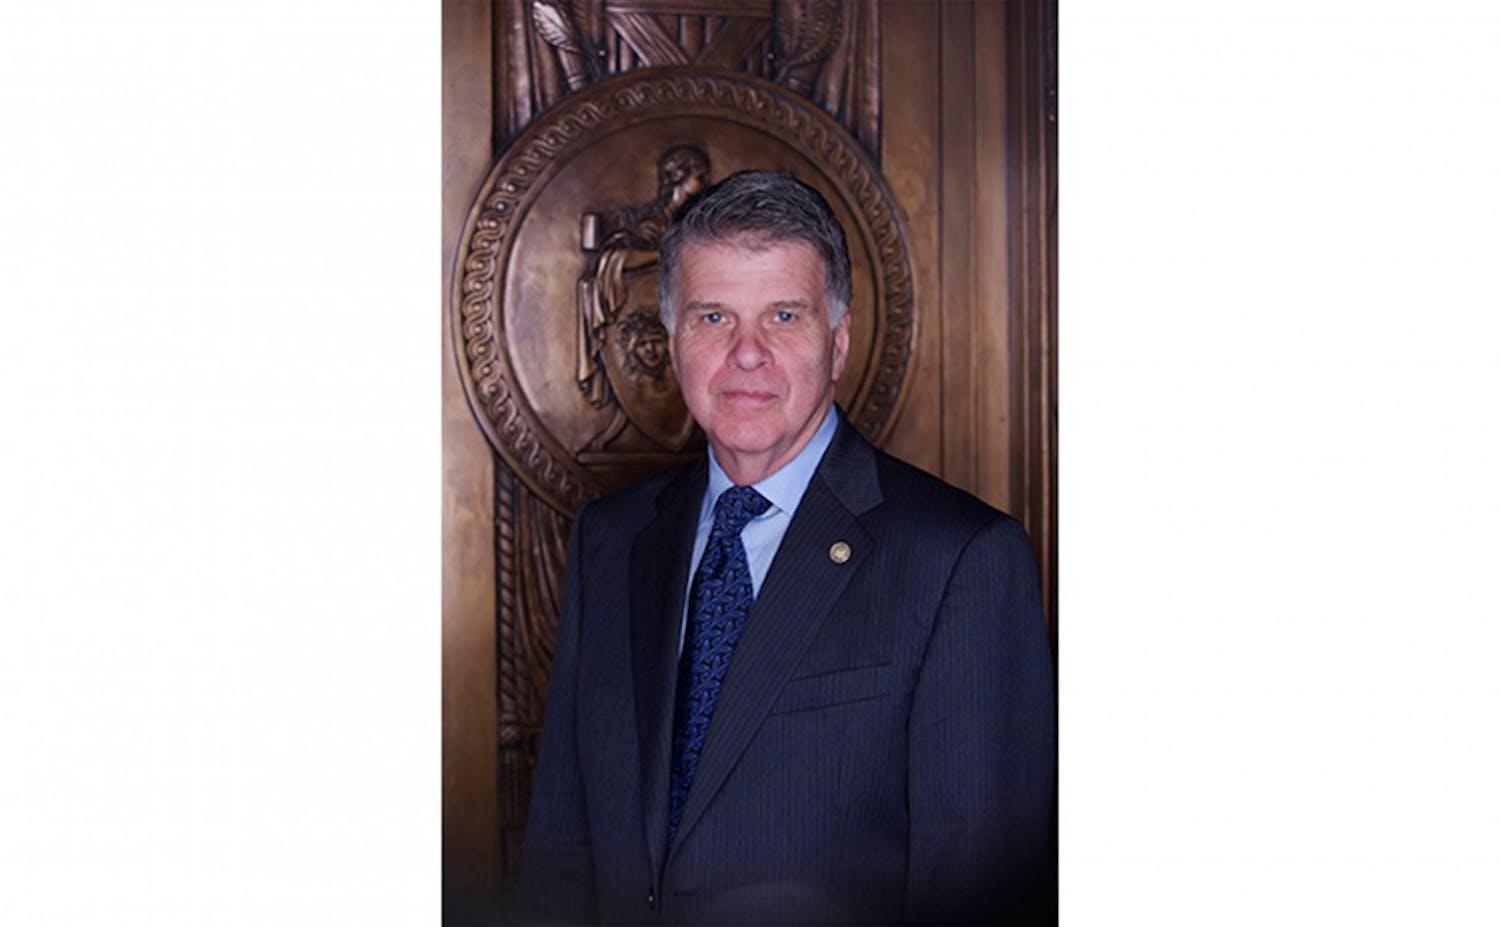 David Ferriero, the 10th Archivist of the U.S., became the first librarian selected for the position in 2009 after previously serving as university librarian at Duke.